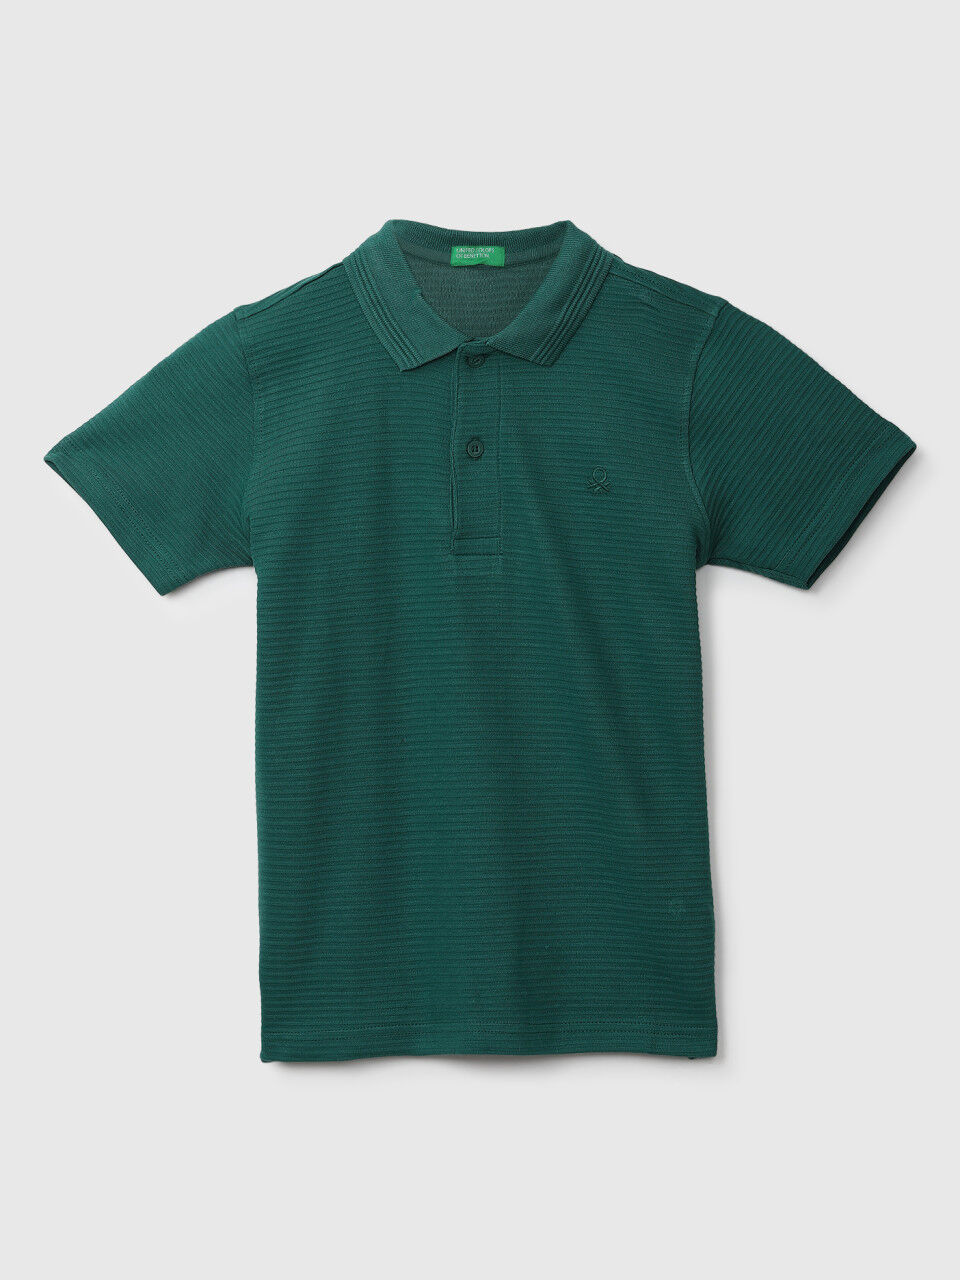 United Colors Of Benetton Ribbed Teal Polo T-Shirt